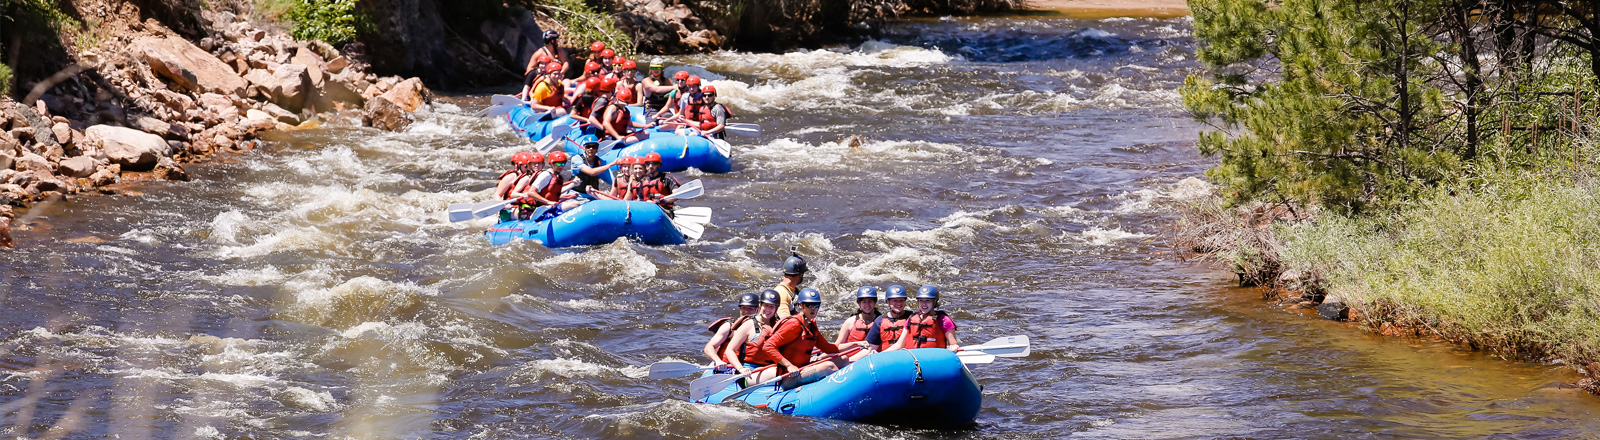 Students taking part is white river rafting.